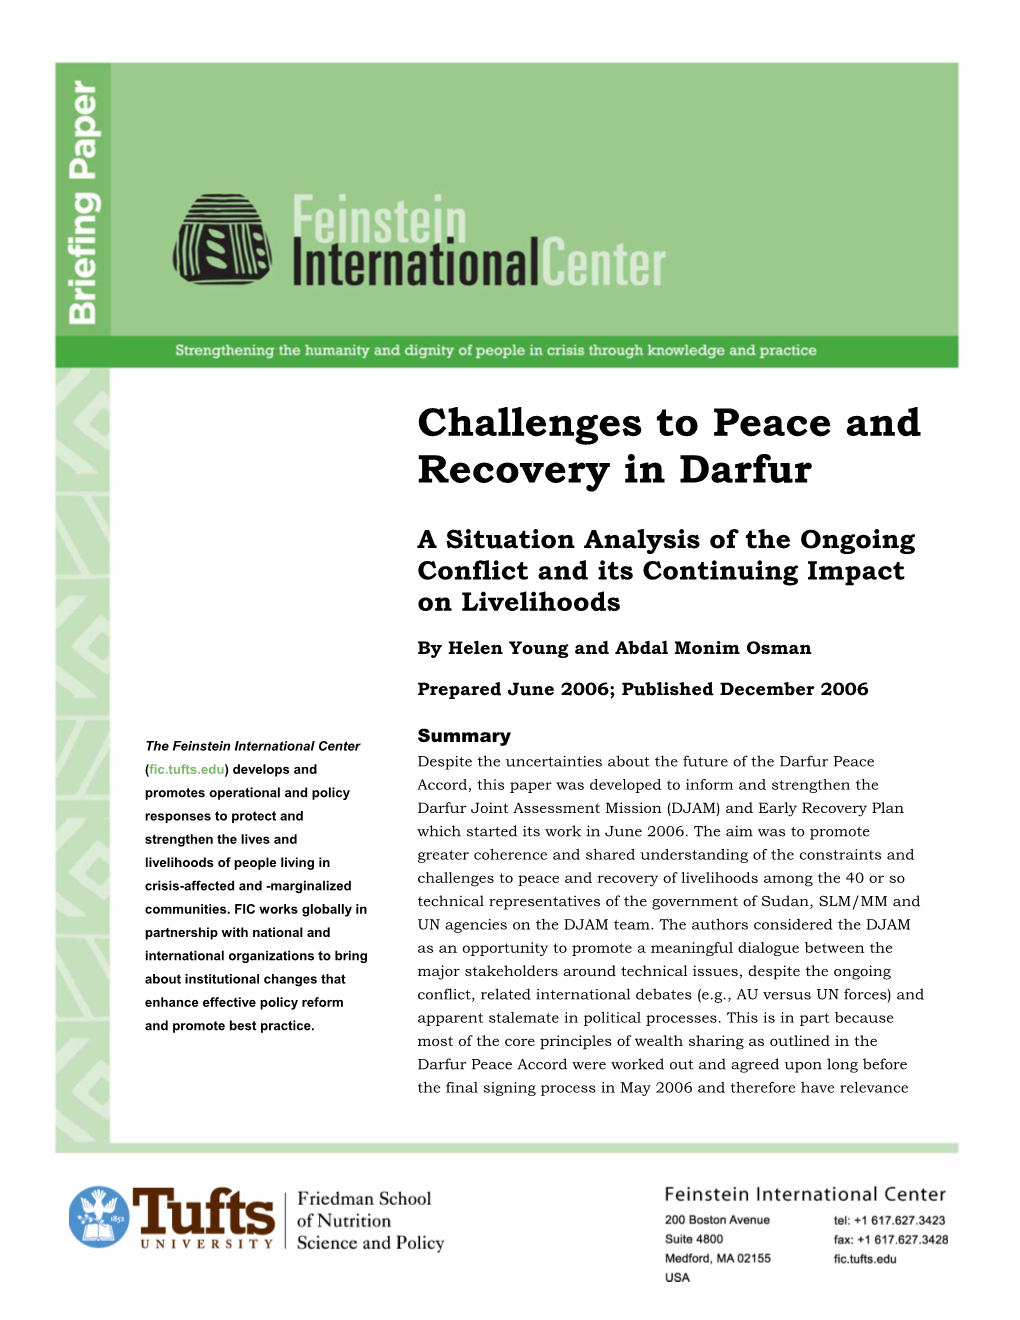 Challenges to Peace and Recovery in Darfur